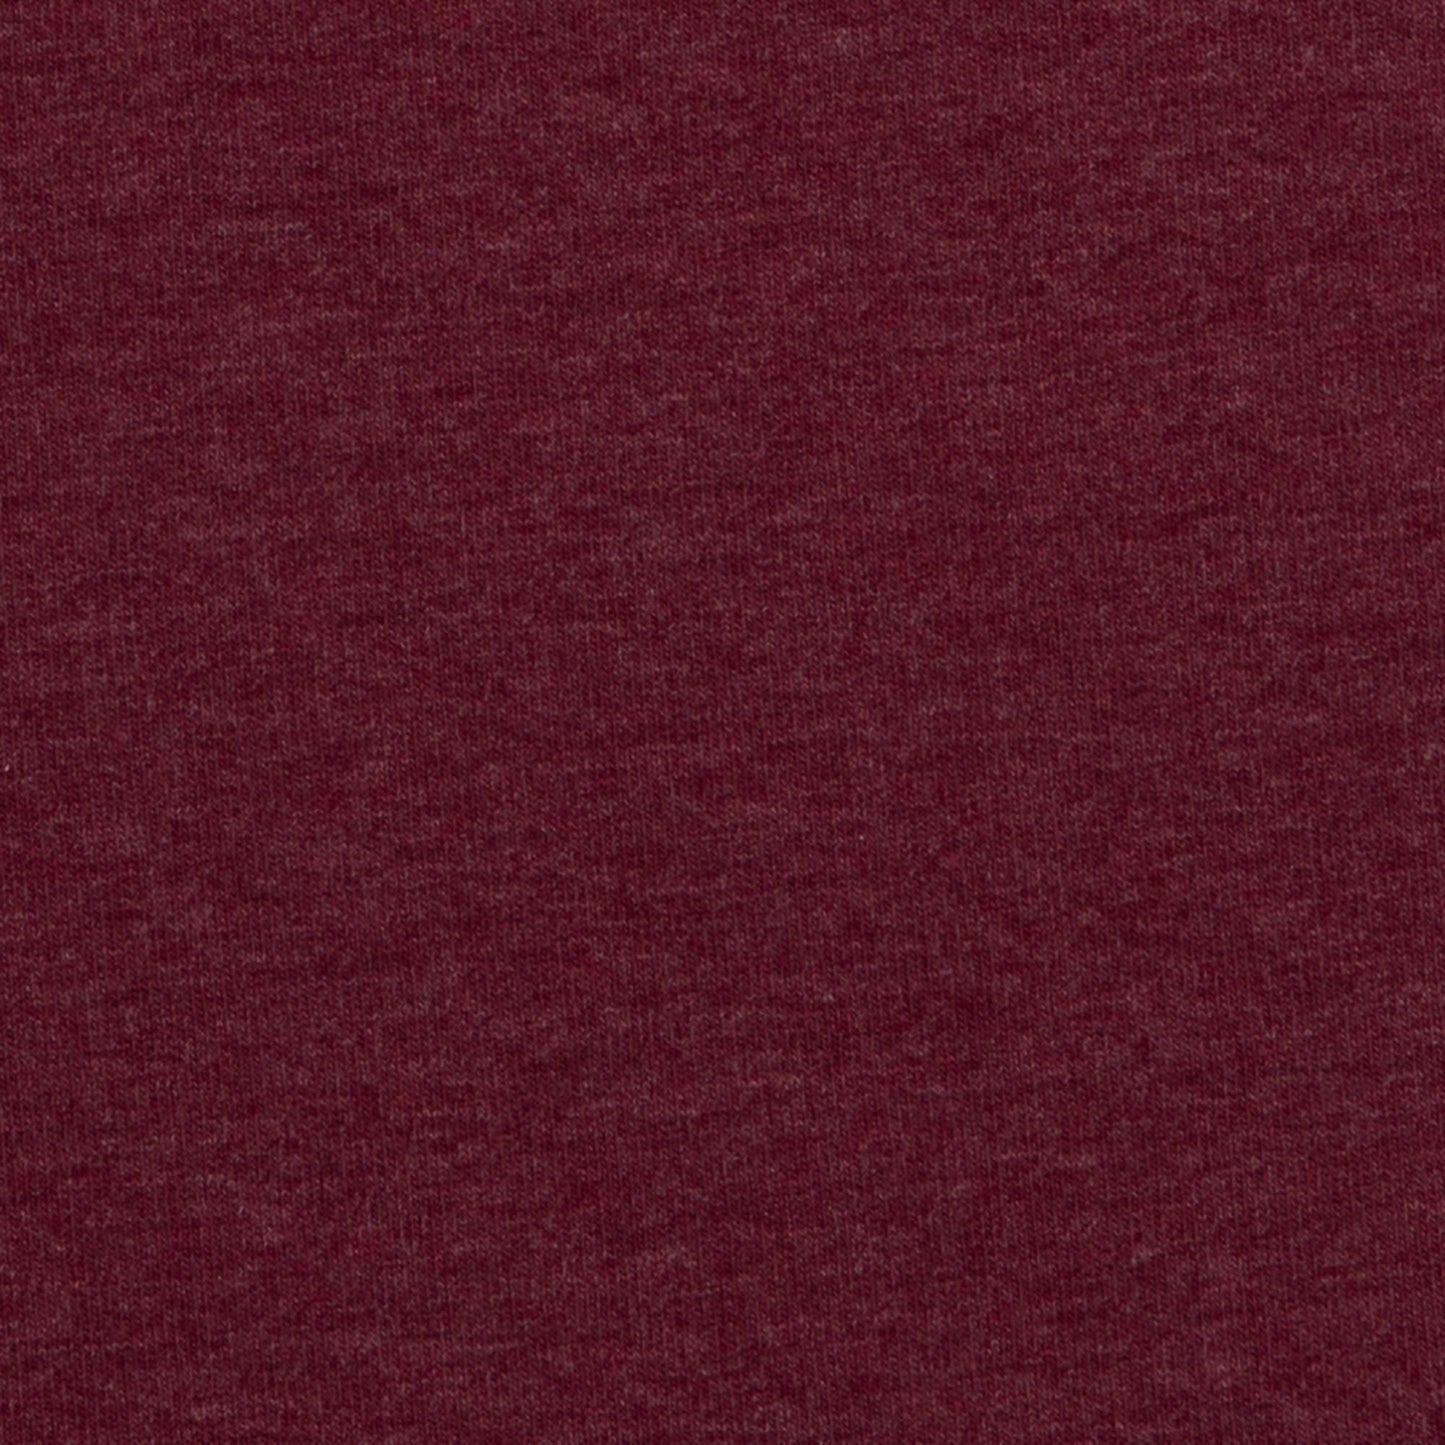 Swafing Melange - Bordeaux - Euro-ribbing - Jersey - French Terry - Fleeced French Terry - 1937 - Little Rhody Sewing Co.